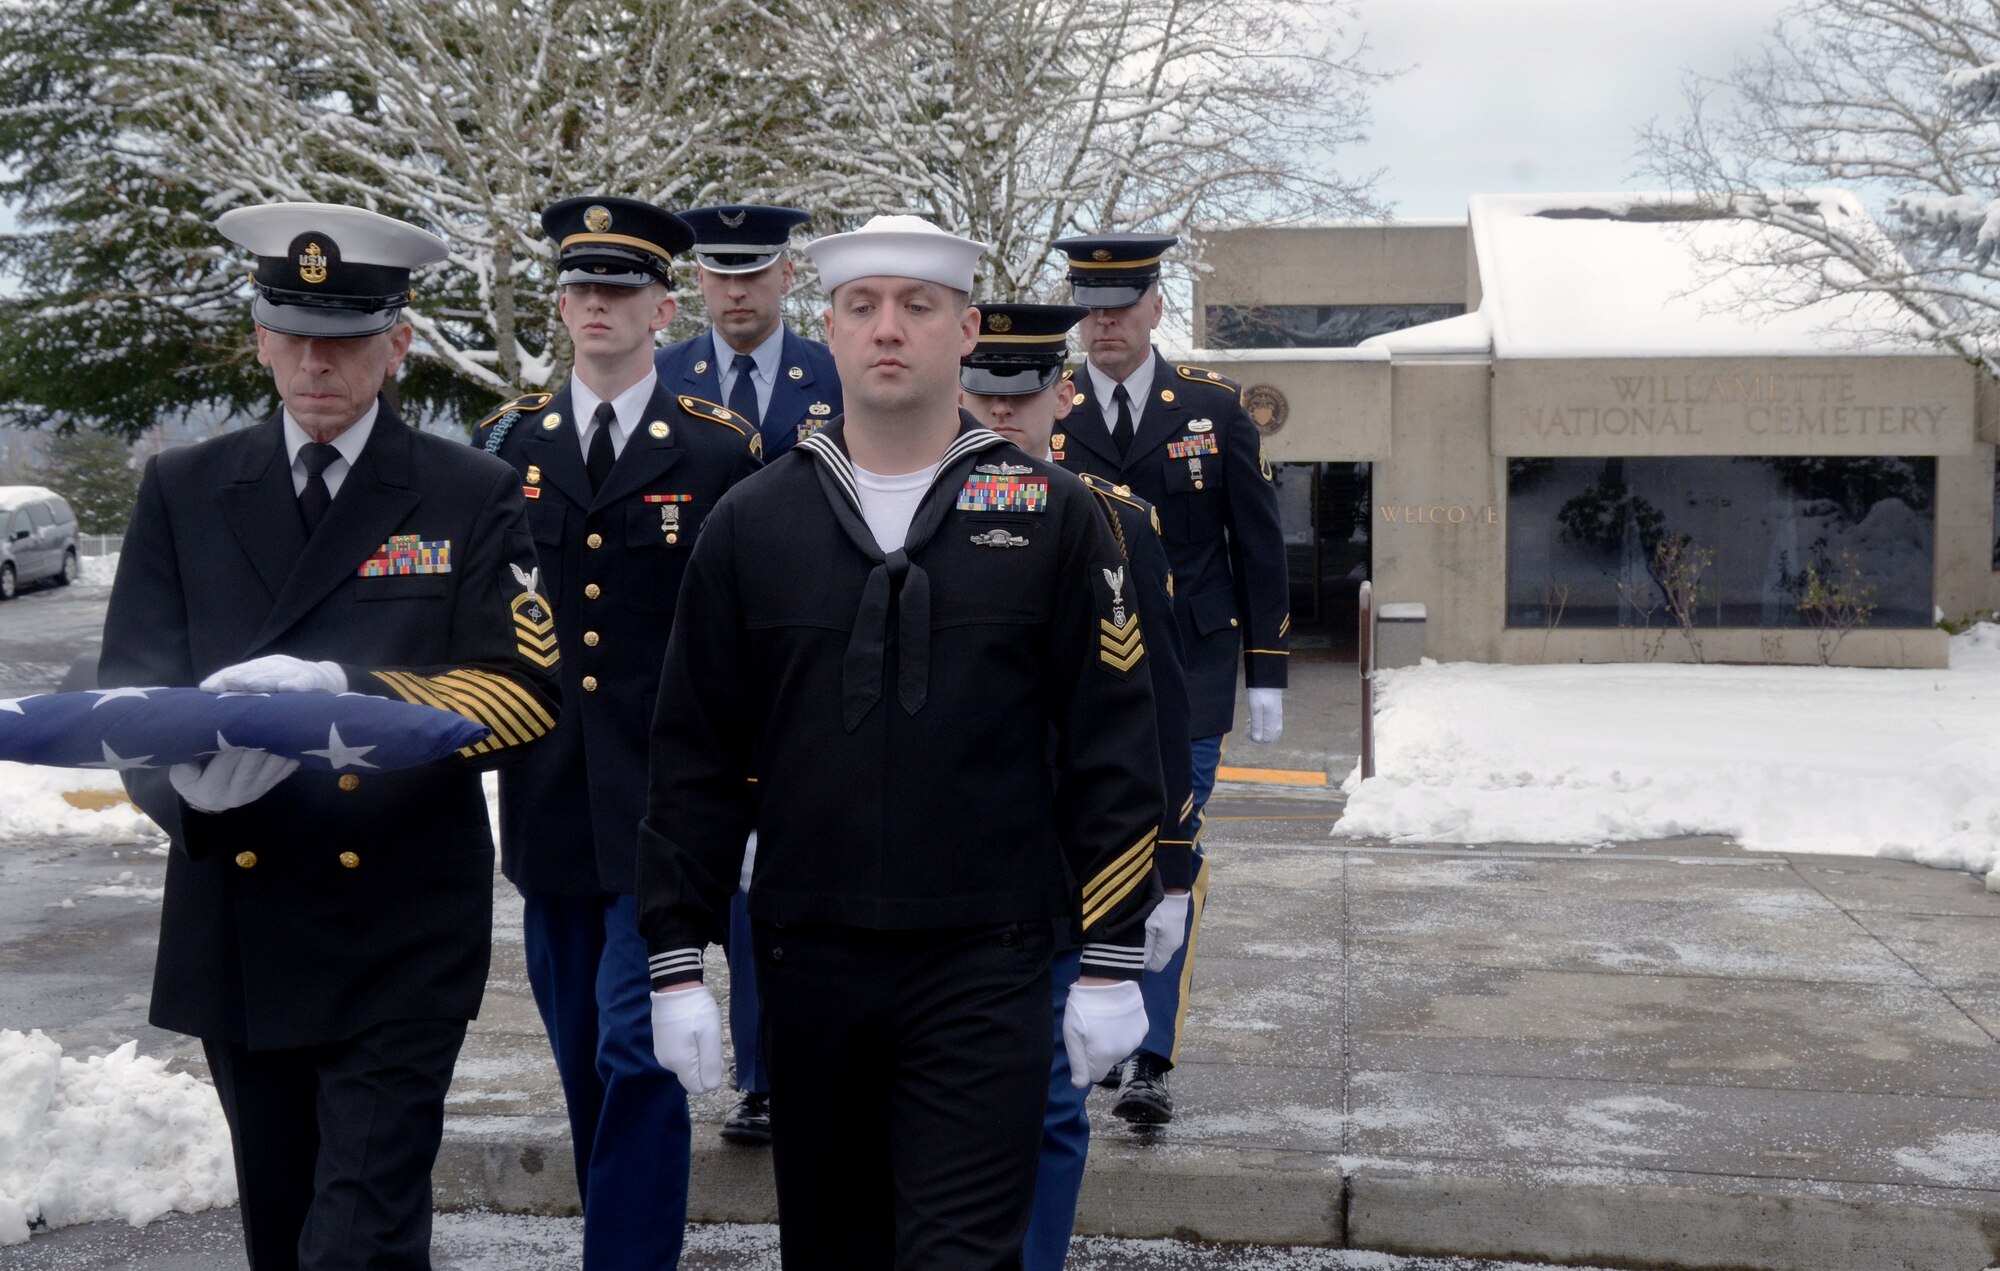 Members of the U.S. Navy Reserve along with members of the Oregon National Guard Army and Air National Guard form a 6-man team as they perform military funeral honors at Willamette National Cemetery, Portland, Ore., Jan. 13, 2017. (U.S. Air National Guard photo by Tech. Sgt. John Hughel, 142nd Fighter Wing Public Affairs) 